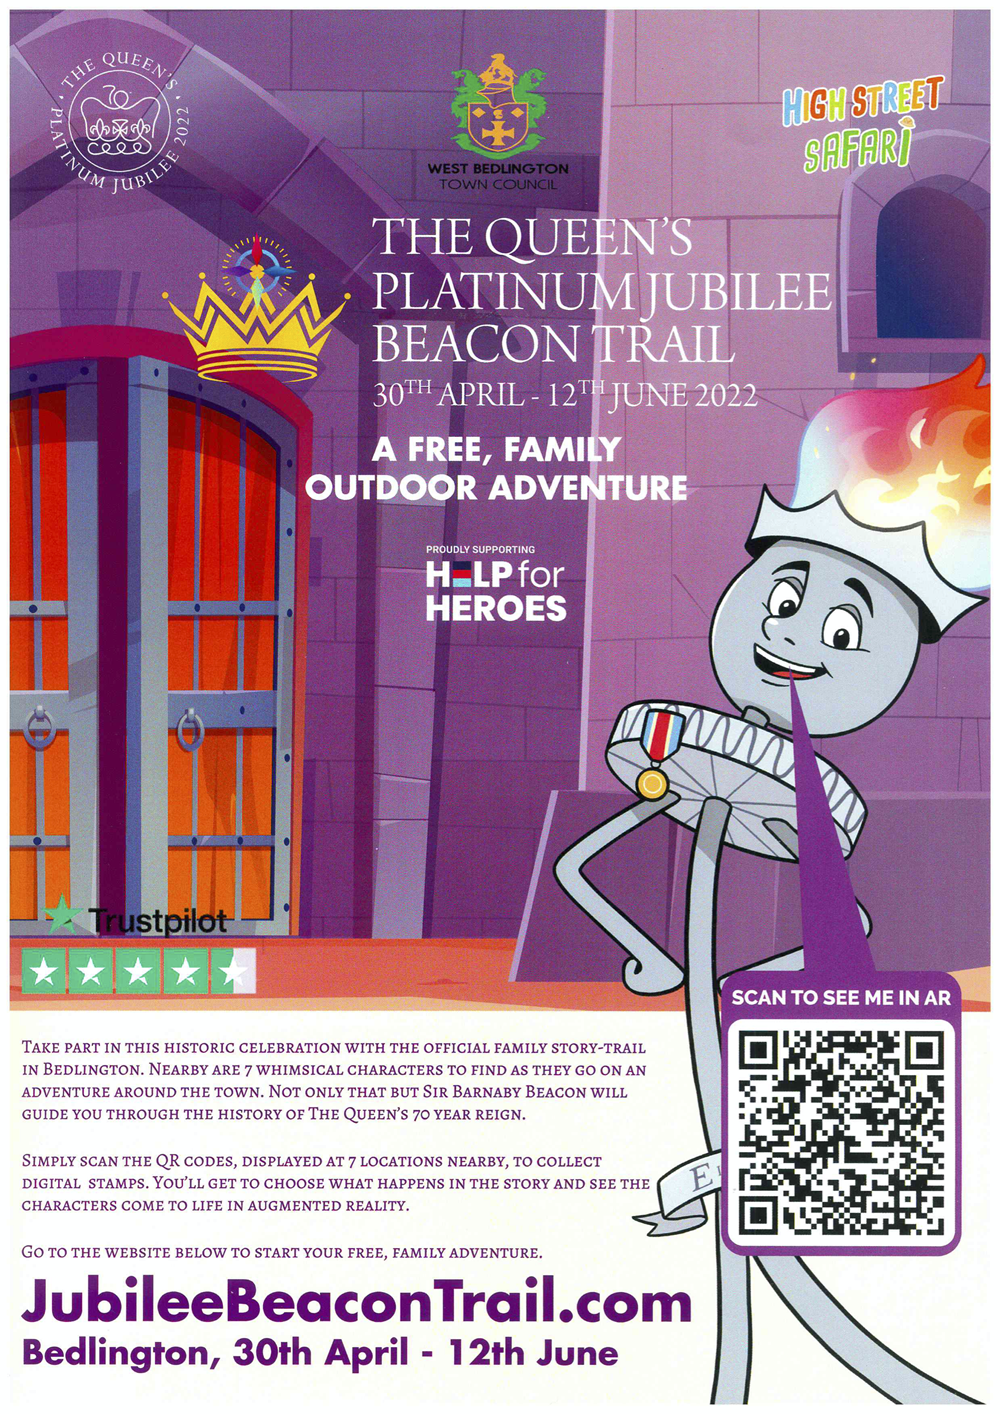 The Queen's Platinum Jubilee Beacon Trail